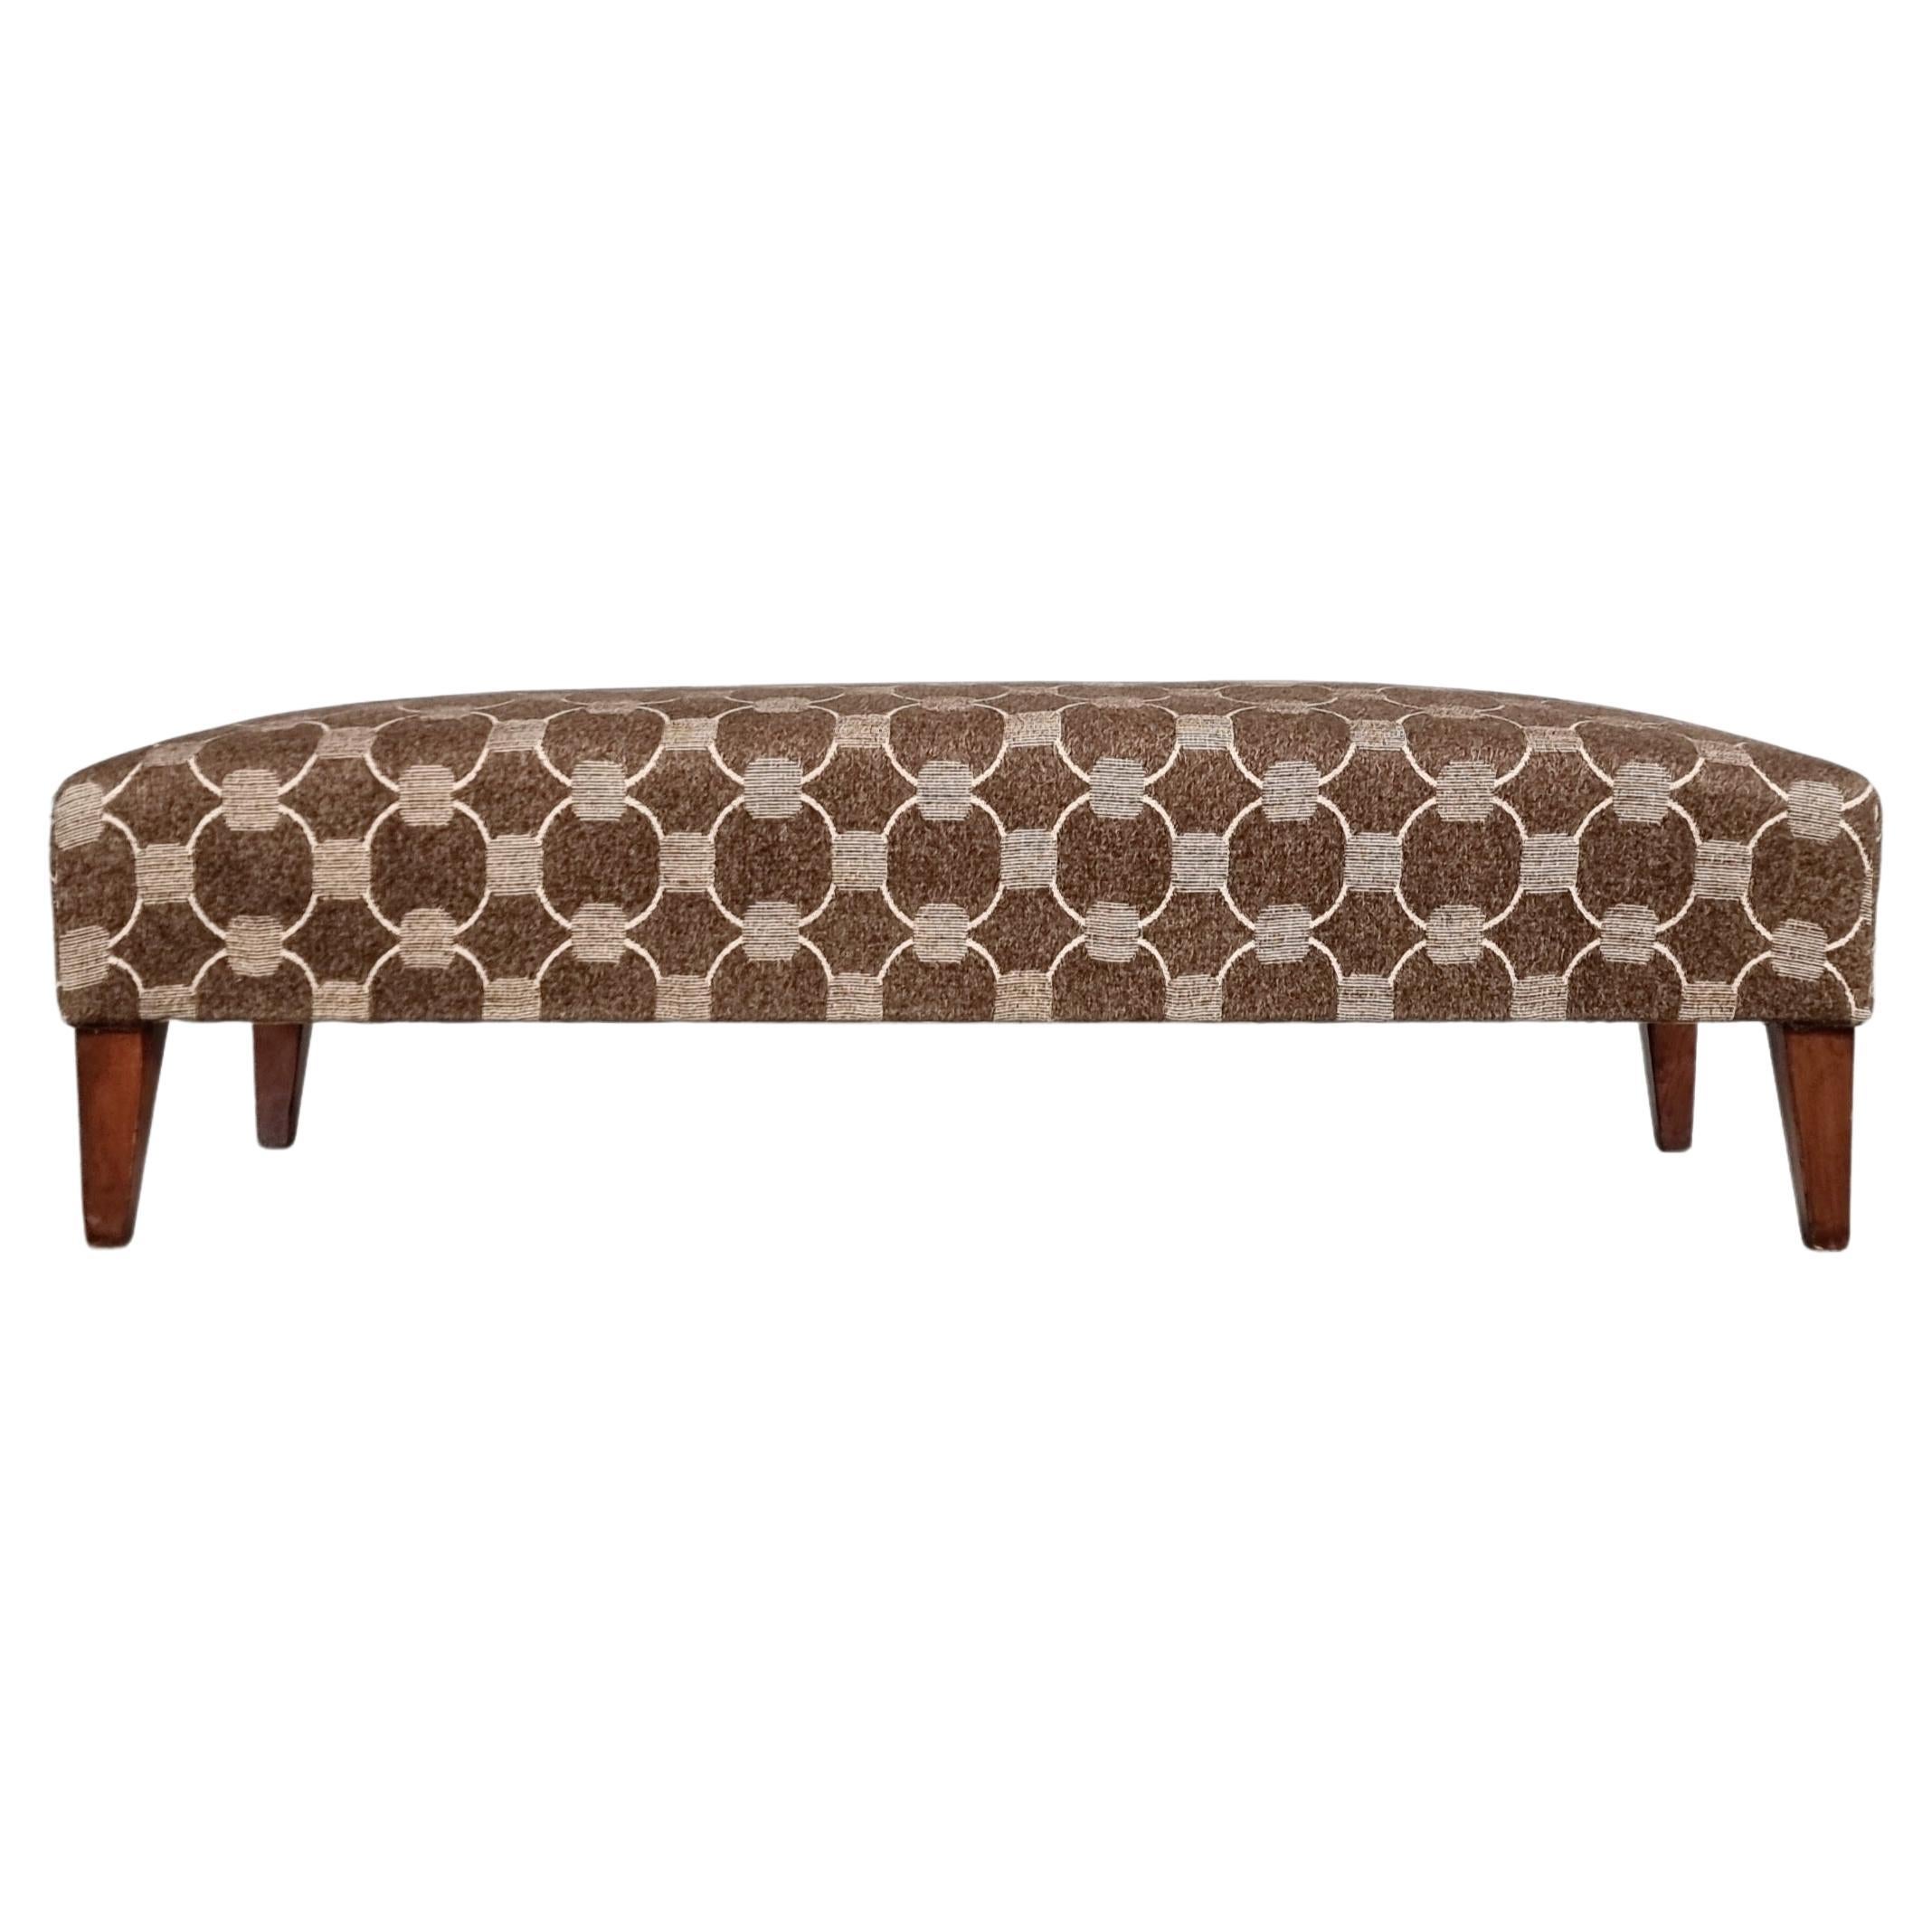 Bench in the manner of Gio Ponti in wood and fabric, 1950s For Sale